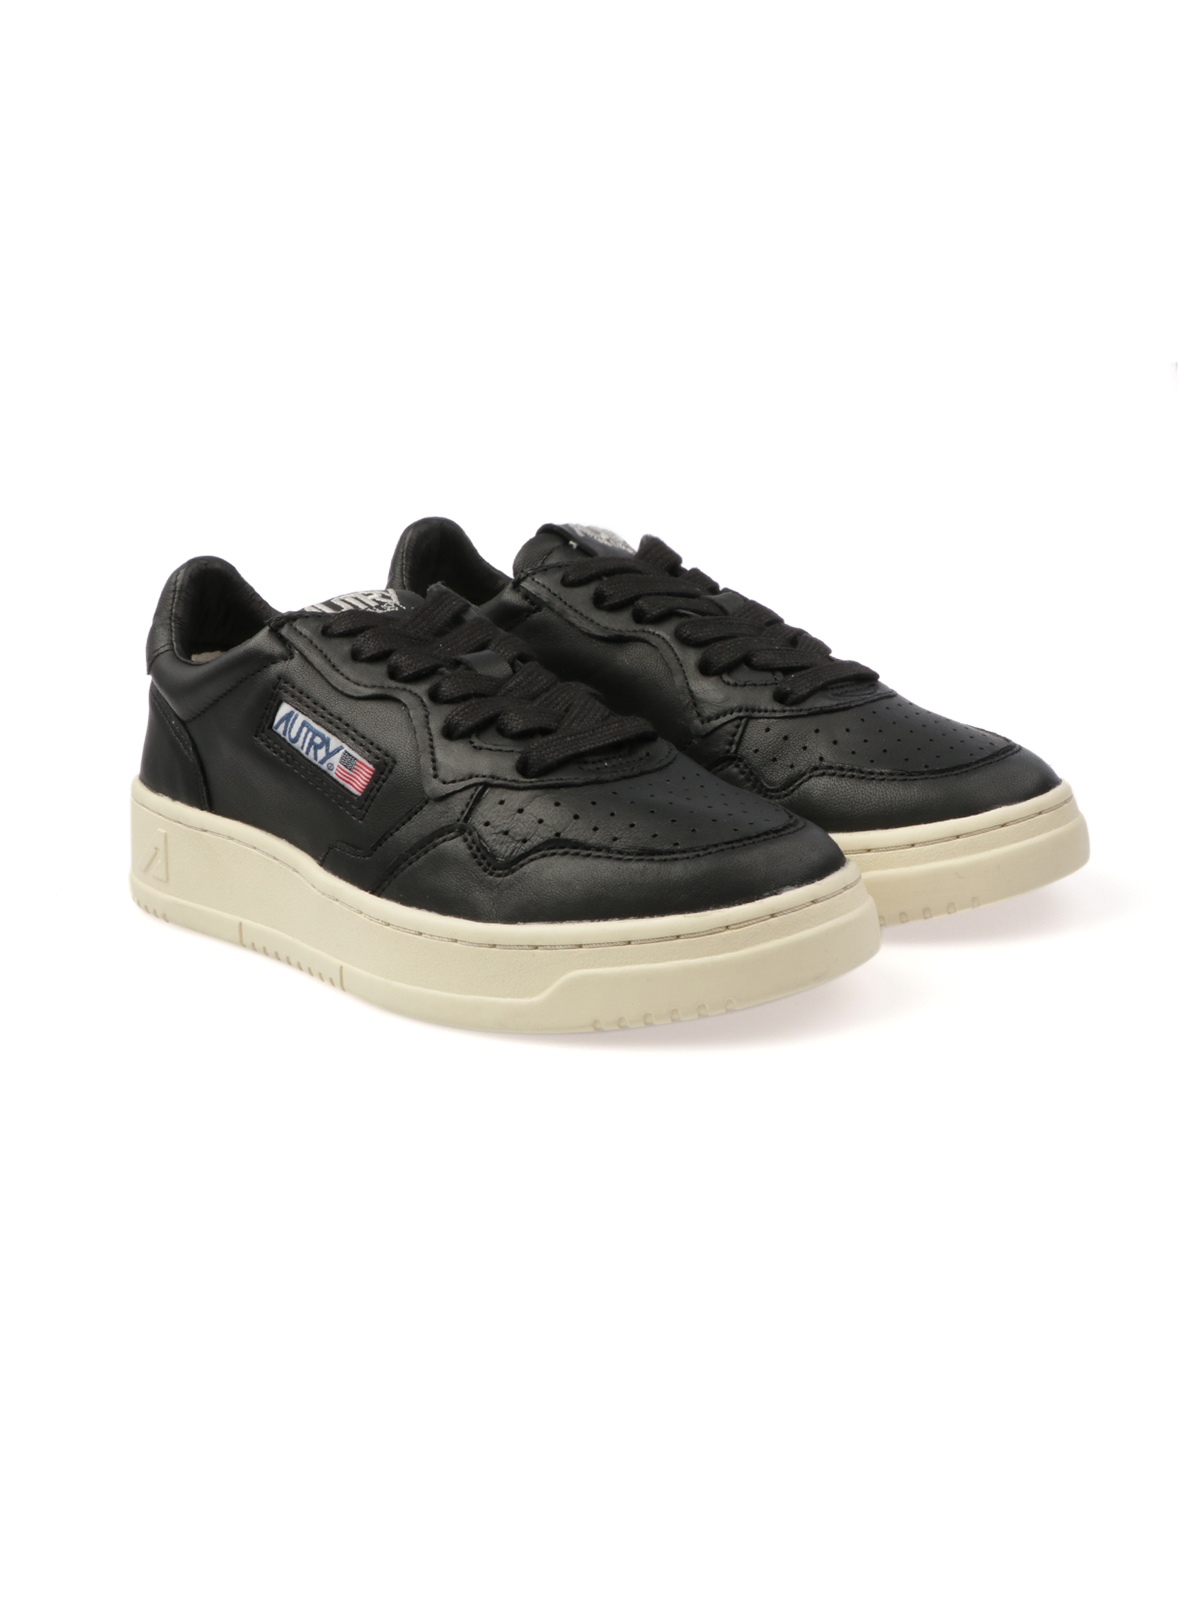 Immagine di Autry | Footwear Autry 01 Low